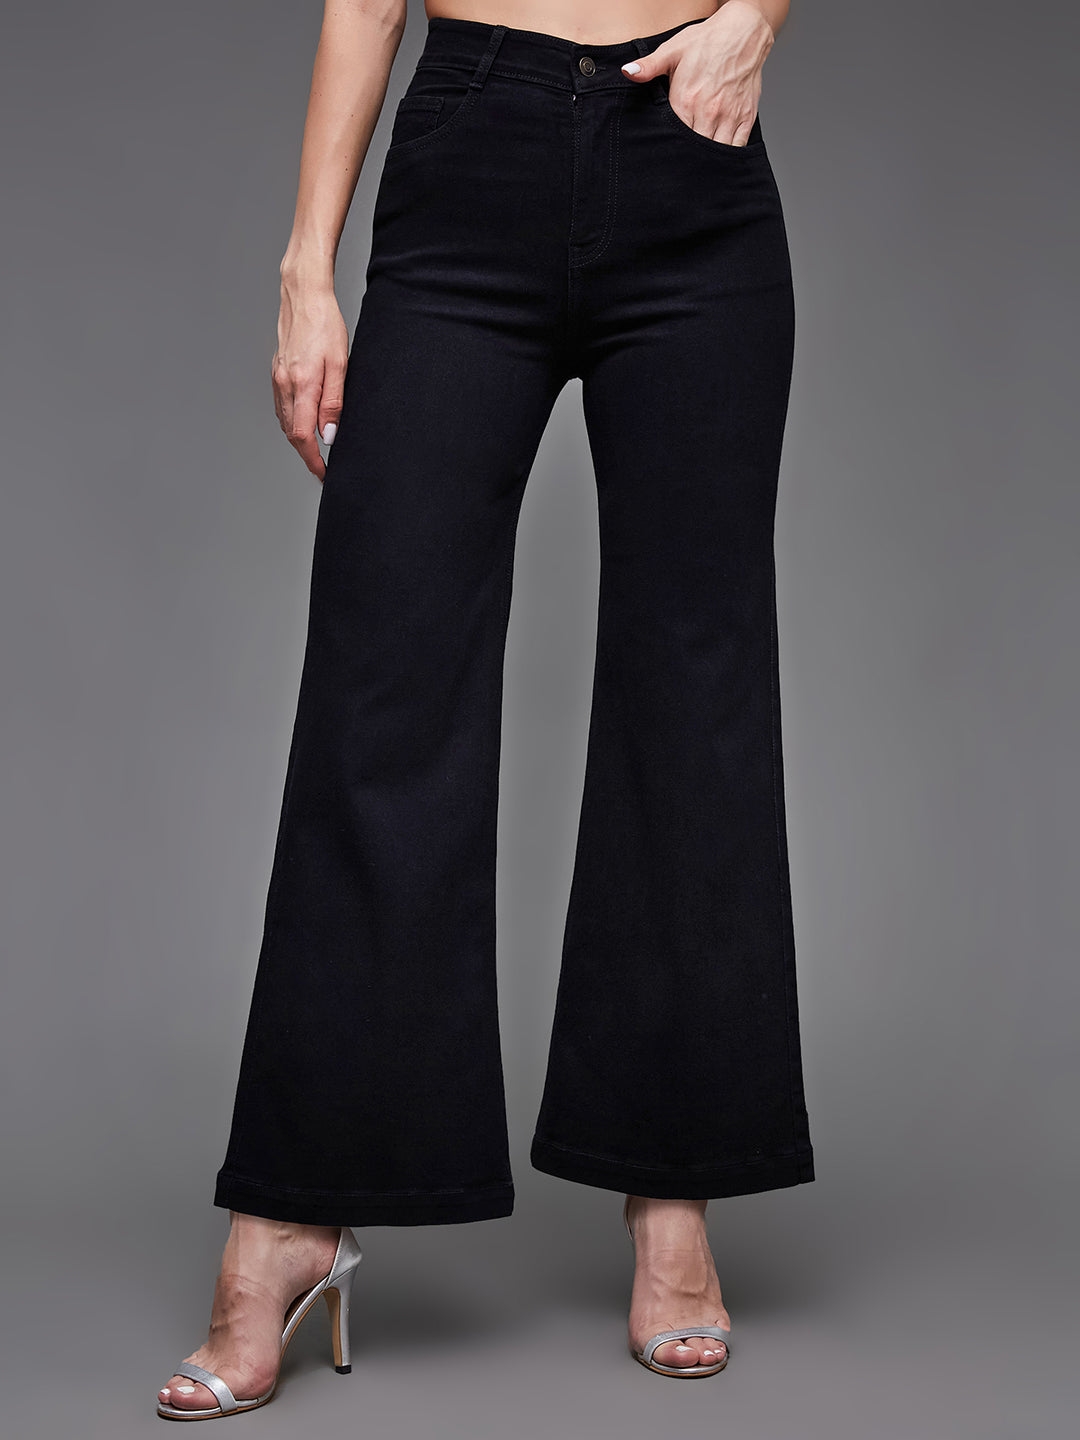 MISS CHASE | Women's Black Solid Flared Jeans